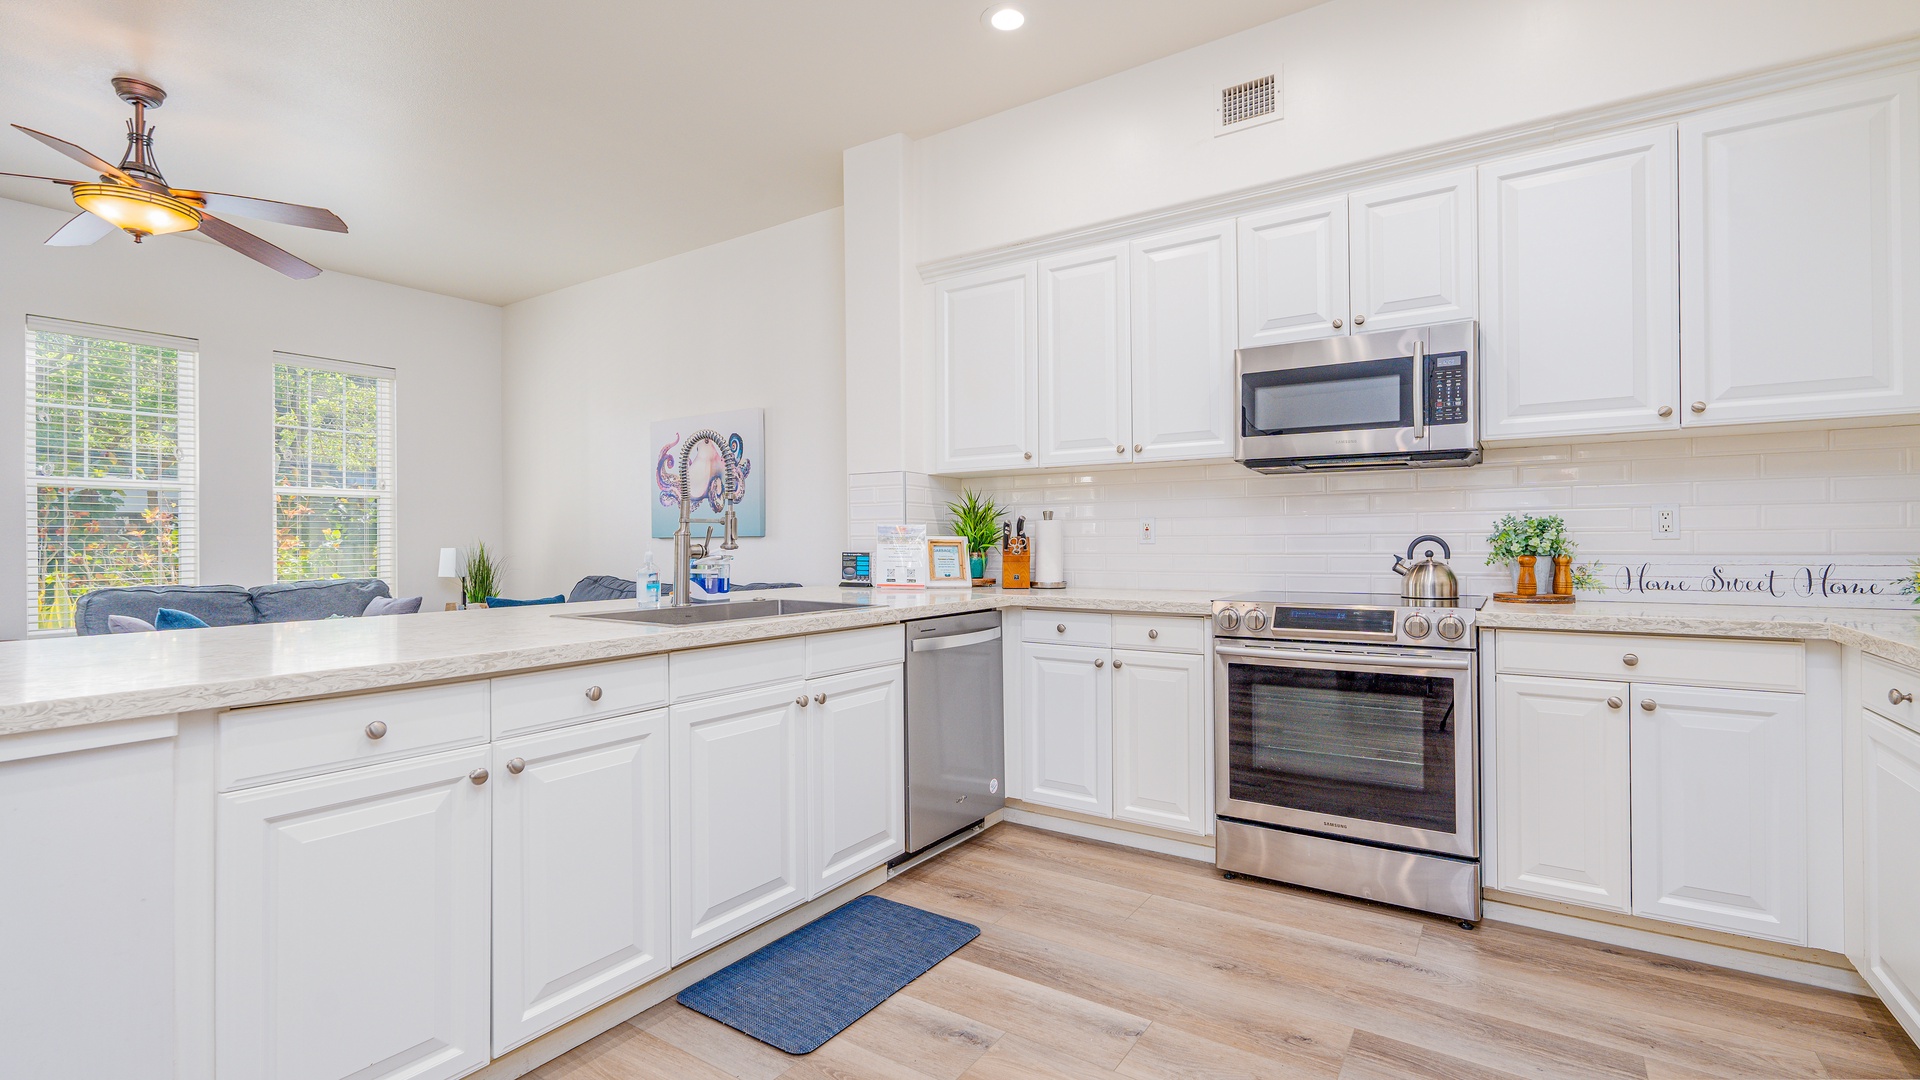 Kapolei Vacation Rentals, Coconut Plantation 1078-1 - The spacious kitchen has all your needs for a relaxing vacation.